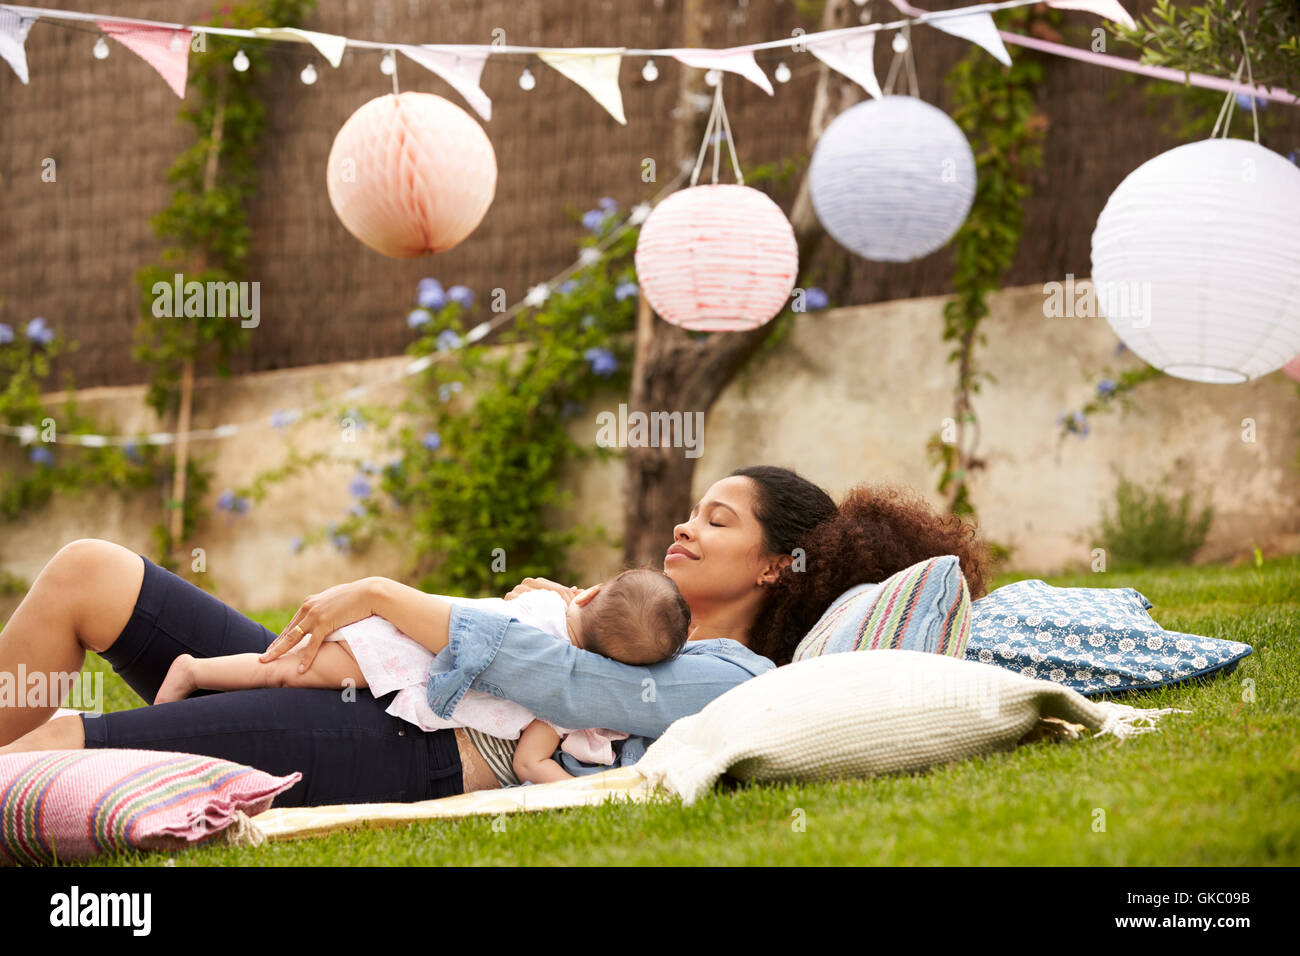 Mother With Baby Relaxing On Rug In Garden Together Stock Photo